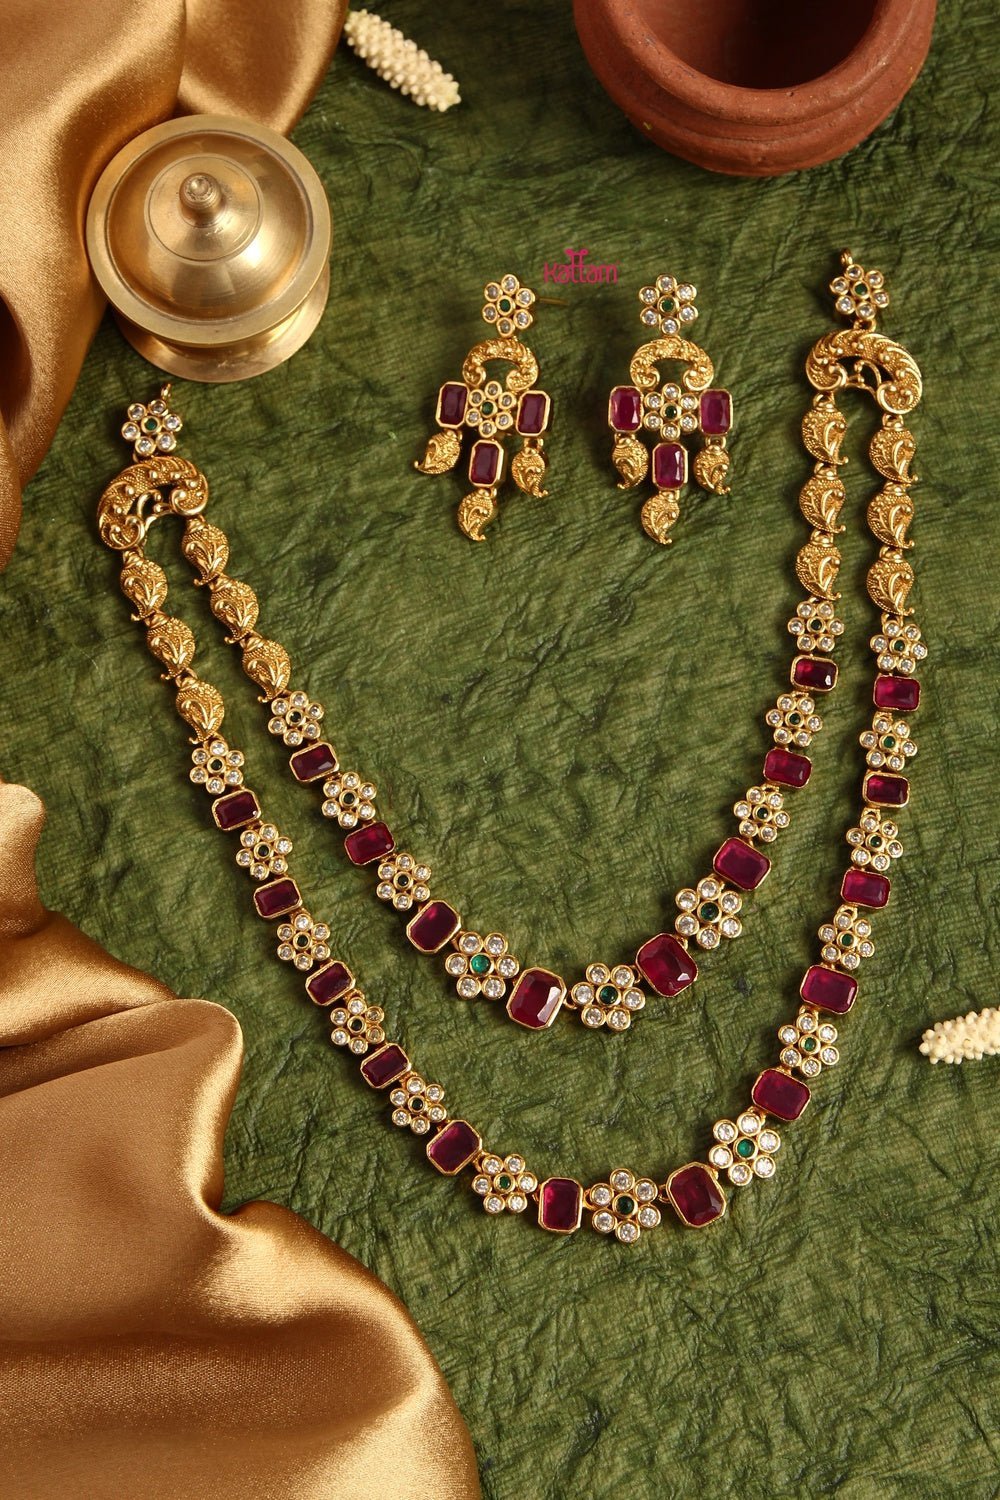 Layered Ruby Necklace - N1205